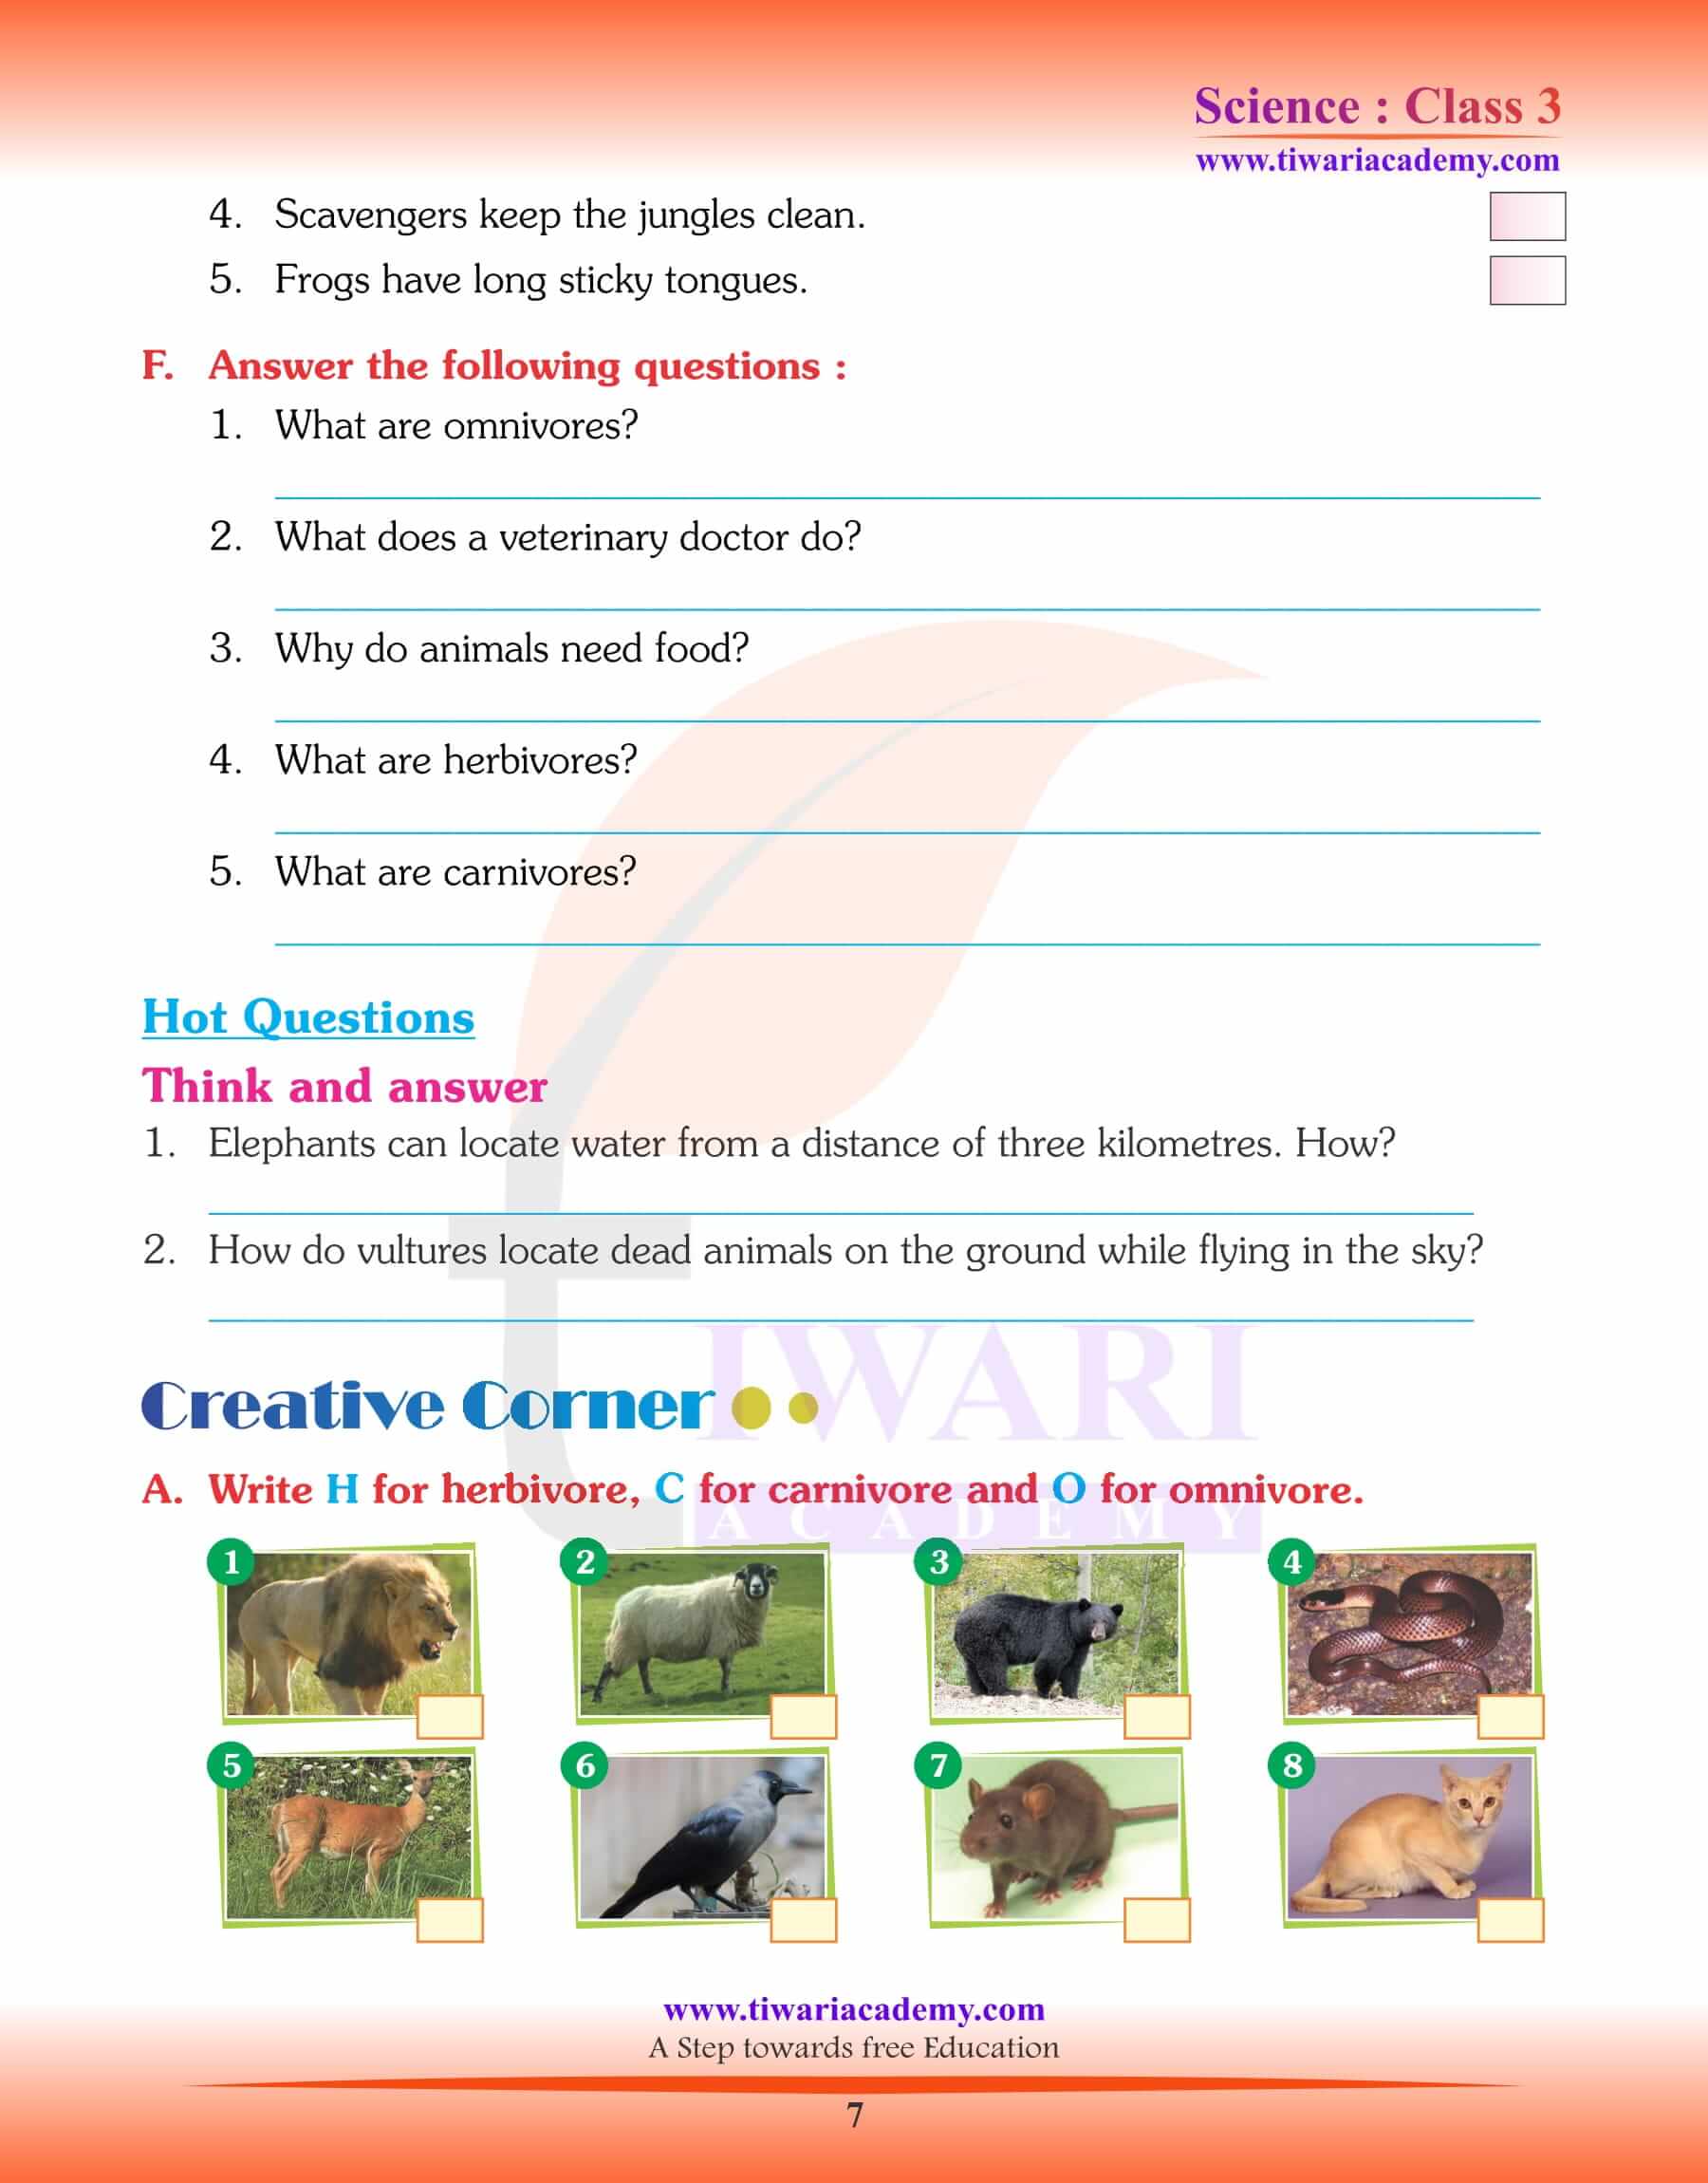 Solutions for Class 3 Science Chapter 5 Animals Food Feeding Habits.